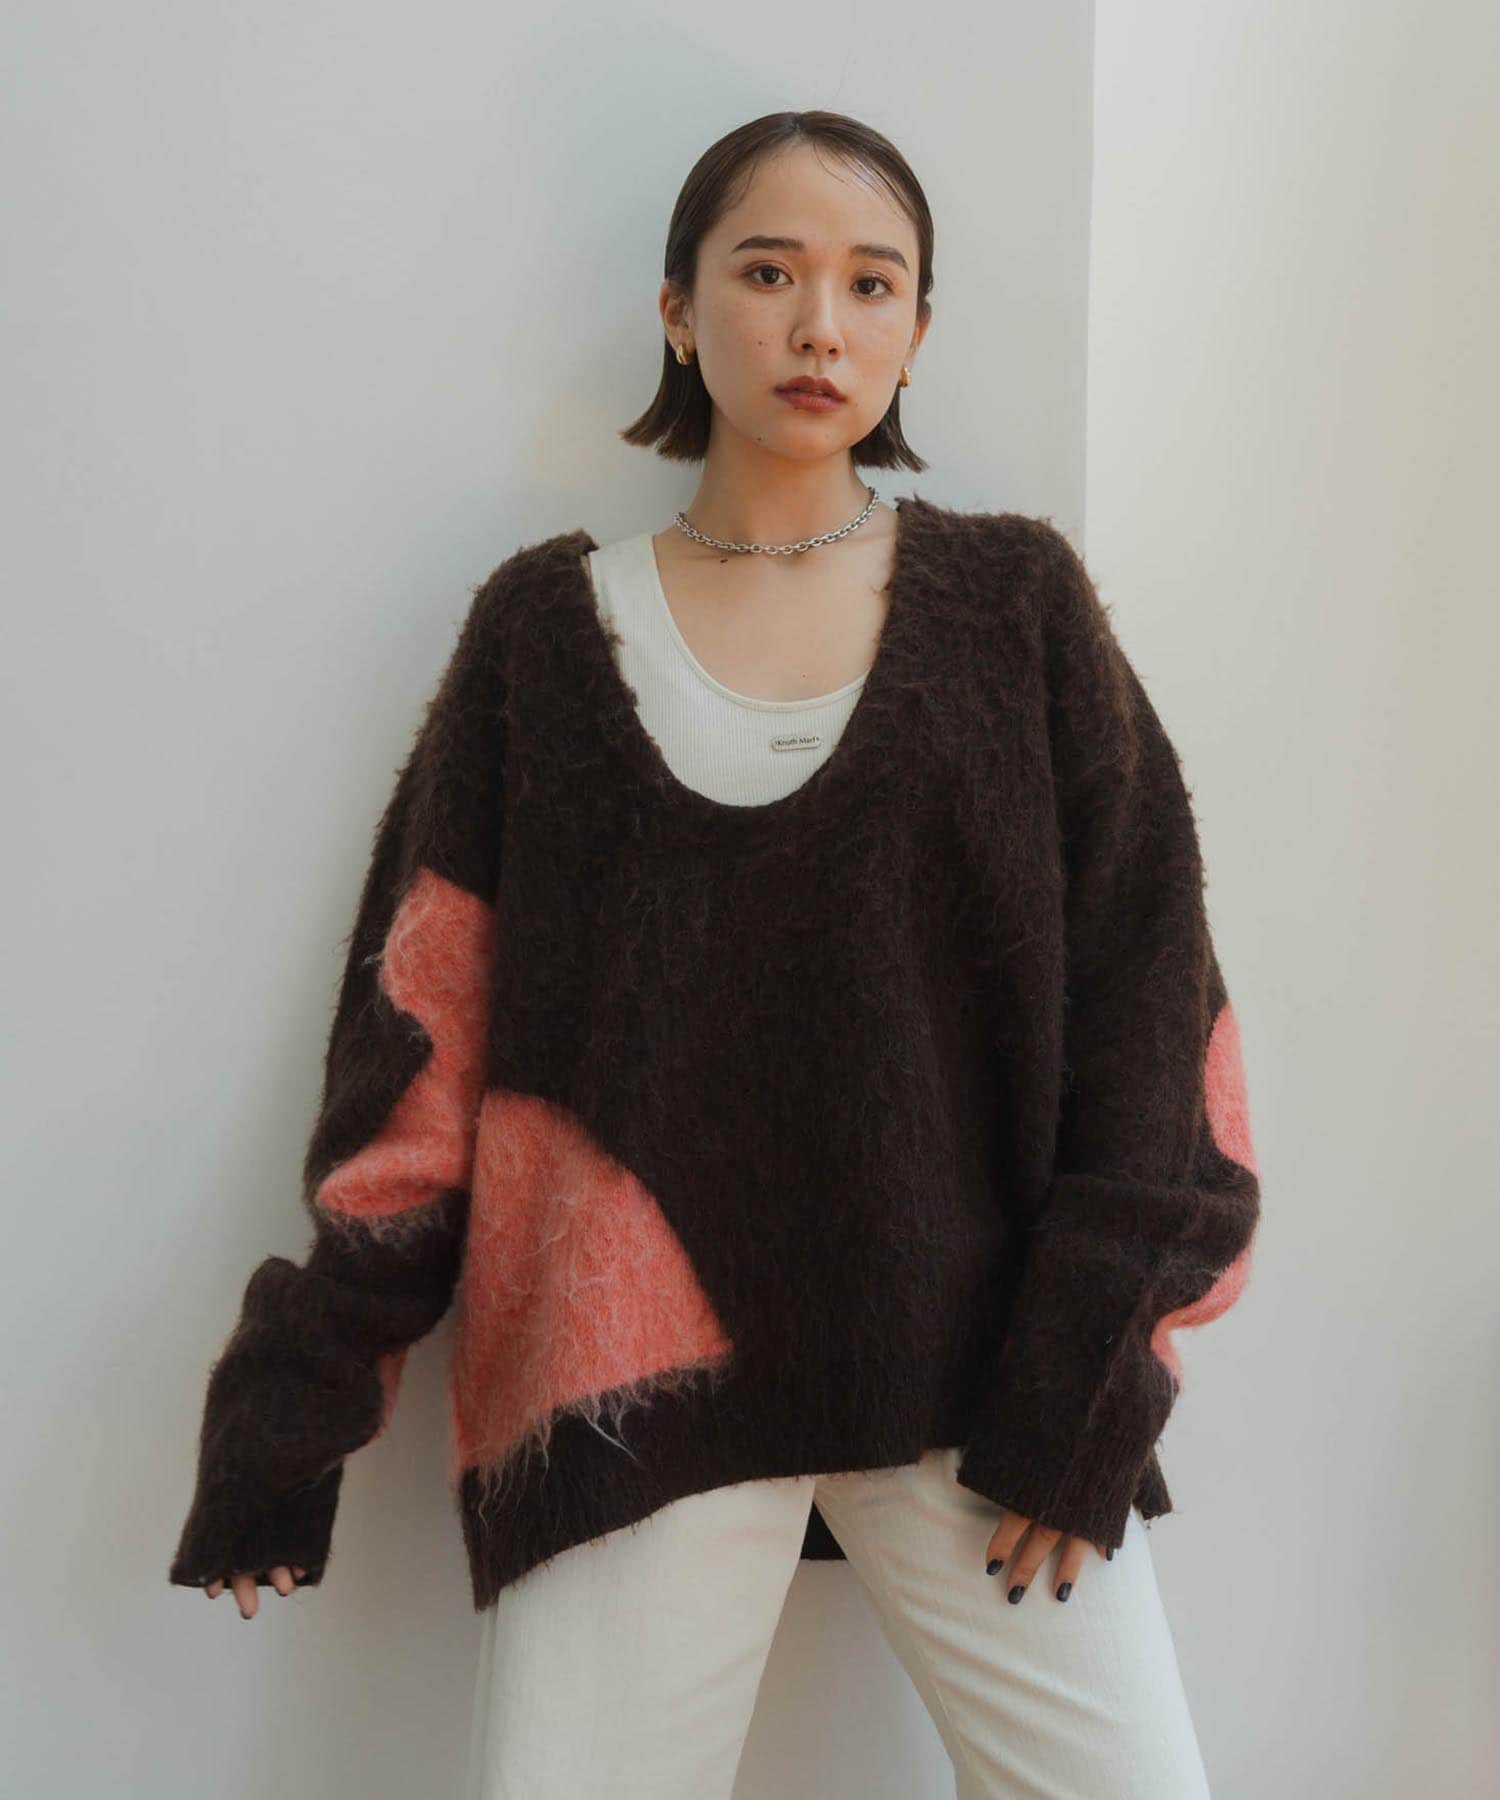 Knuthmarf Uneck knit pullover(unisex)